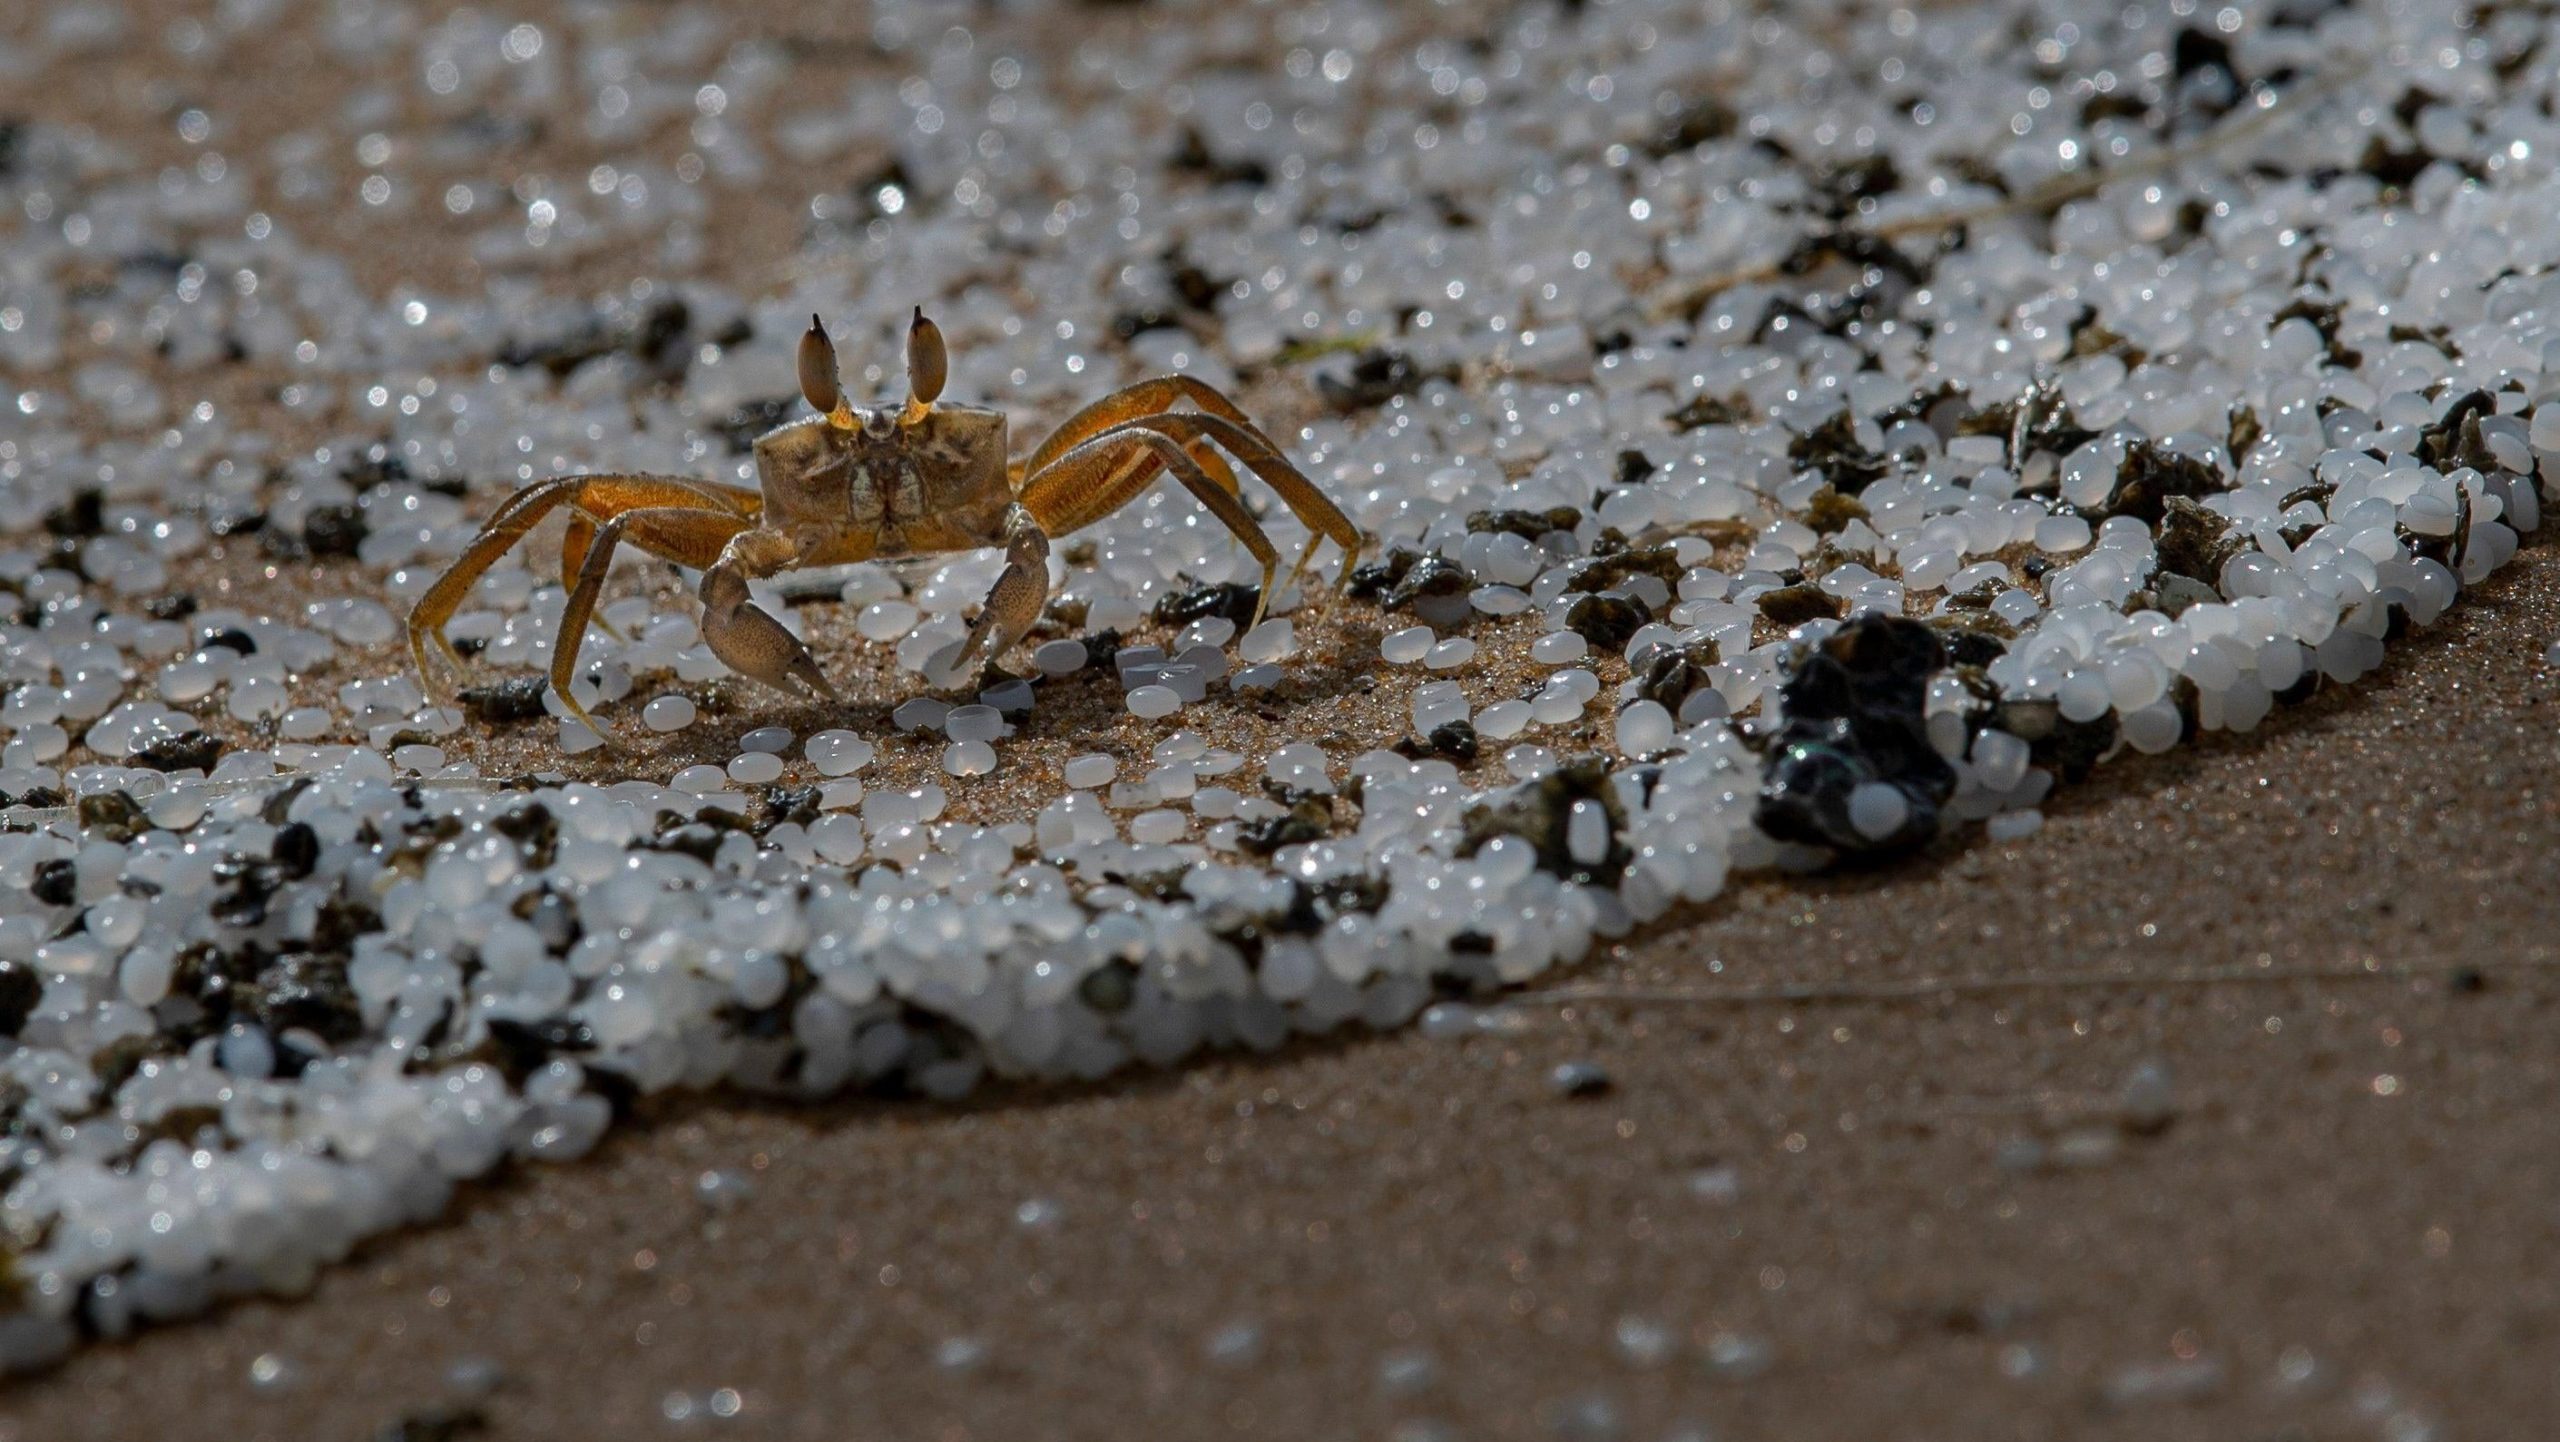 A crab roams on a beach polluted with plastic pellets that washed ashore from the burning ship. (Photo: Eranga Jayawardena, AP)